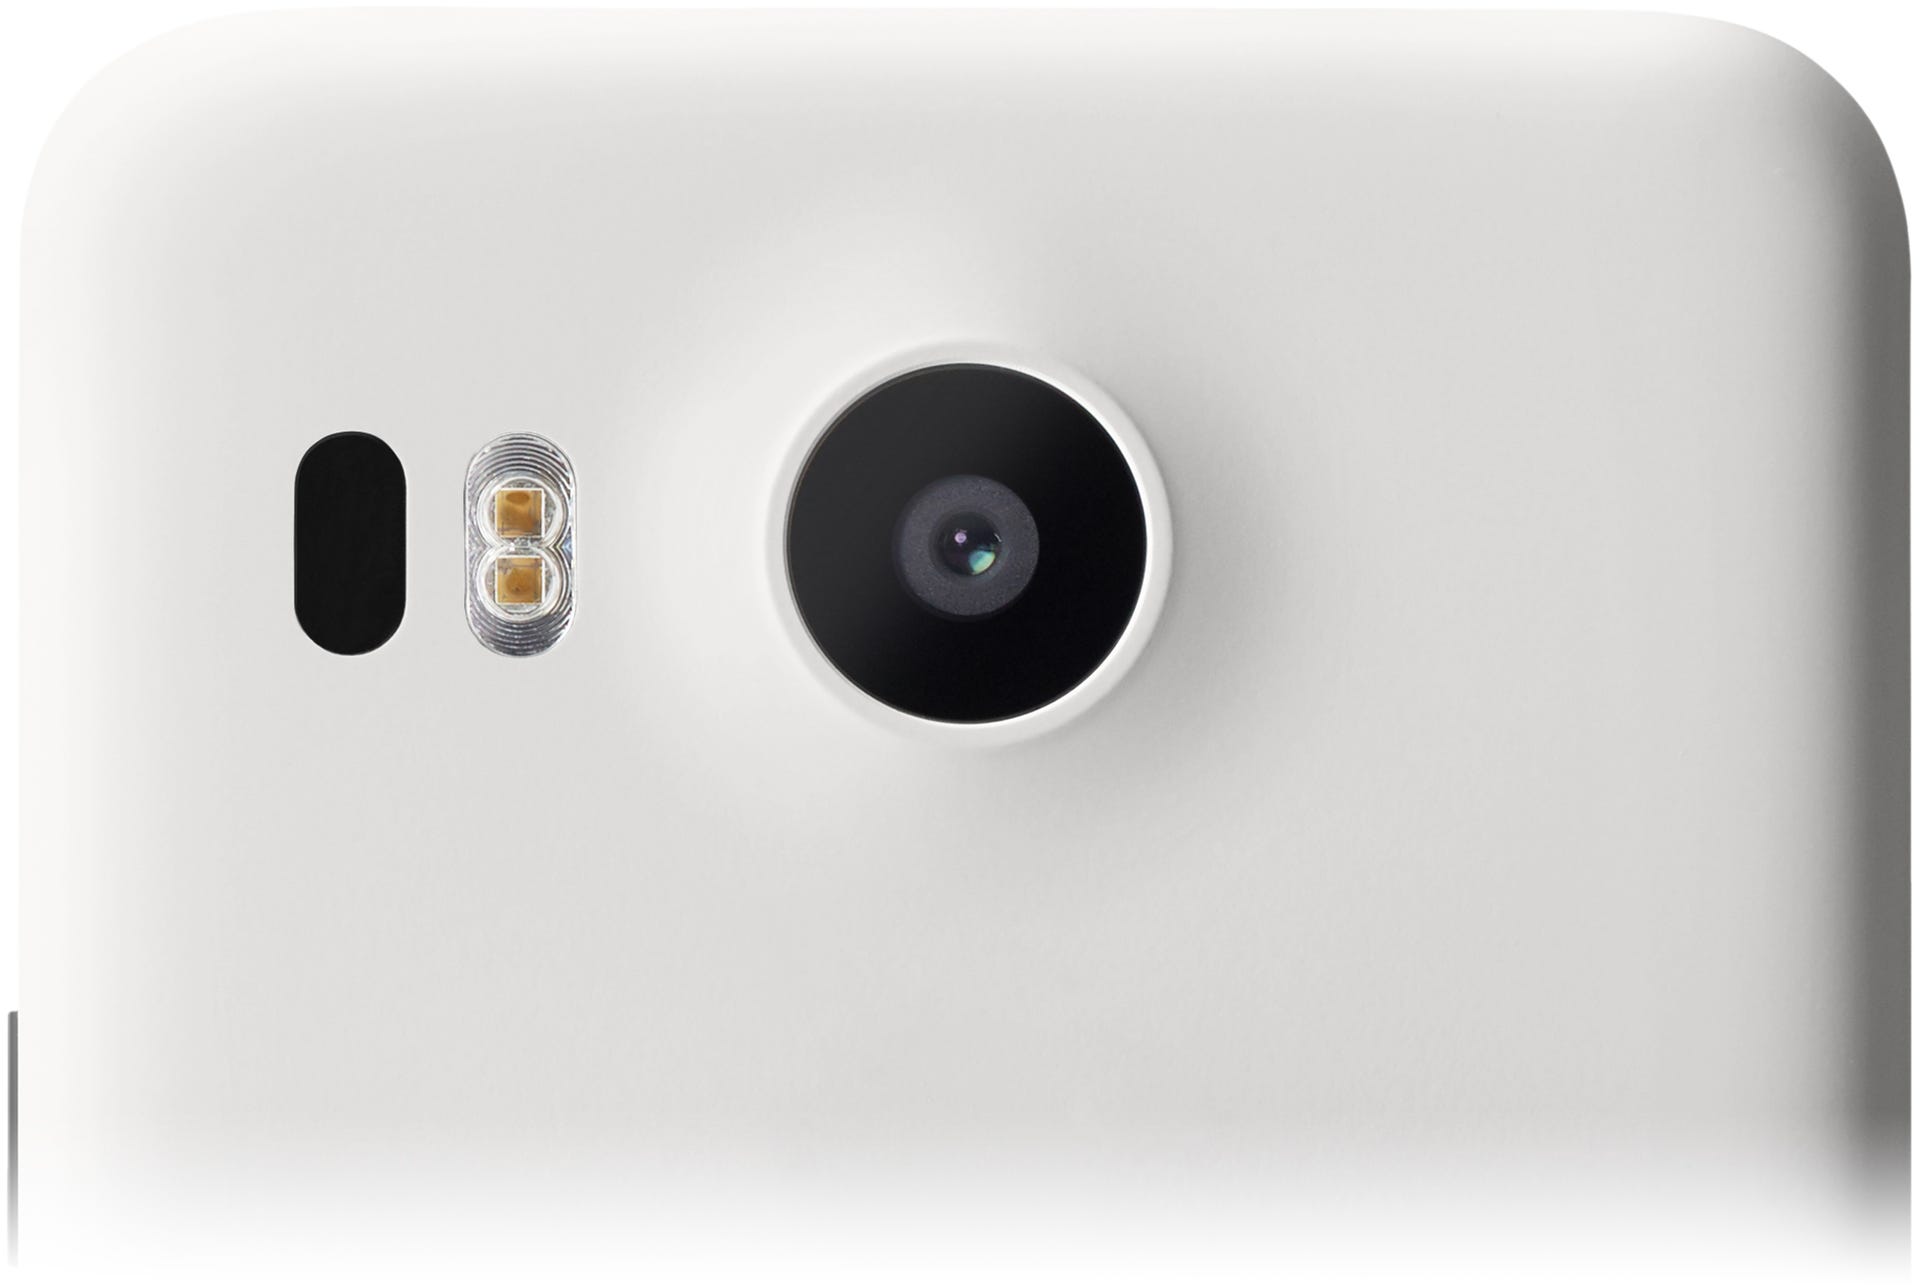 The Nexus 5X and 6P come with a premium camera.